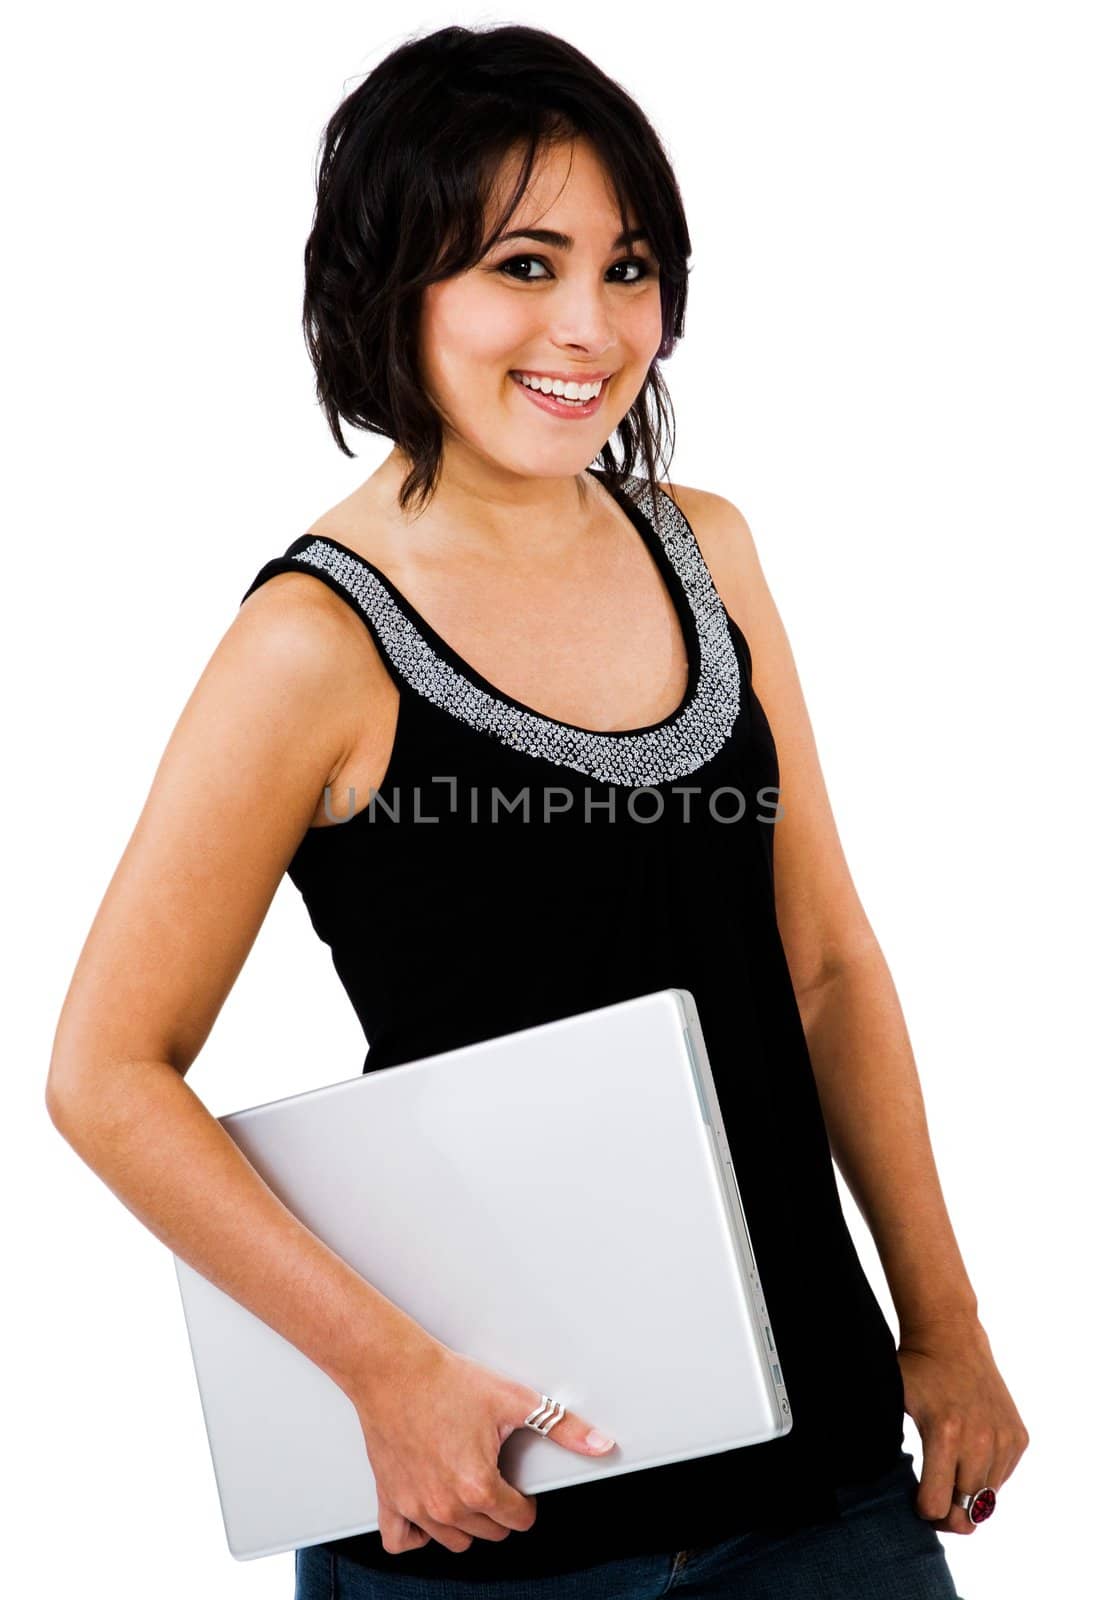 Mixedrace young woman holding a laptop and smiling isolated over white